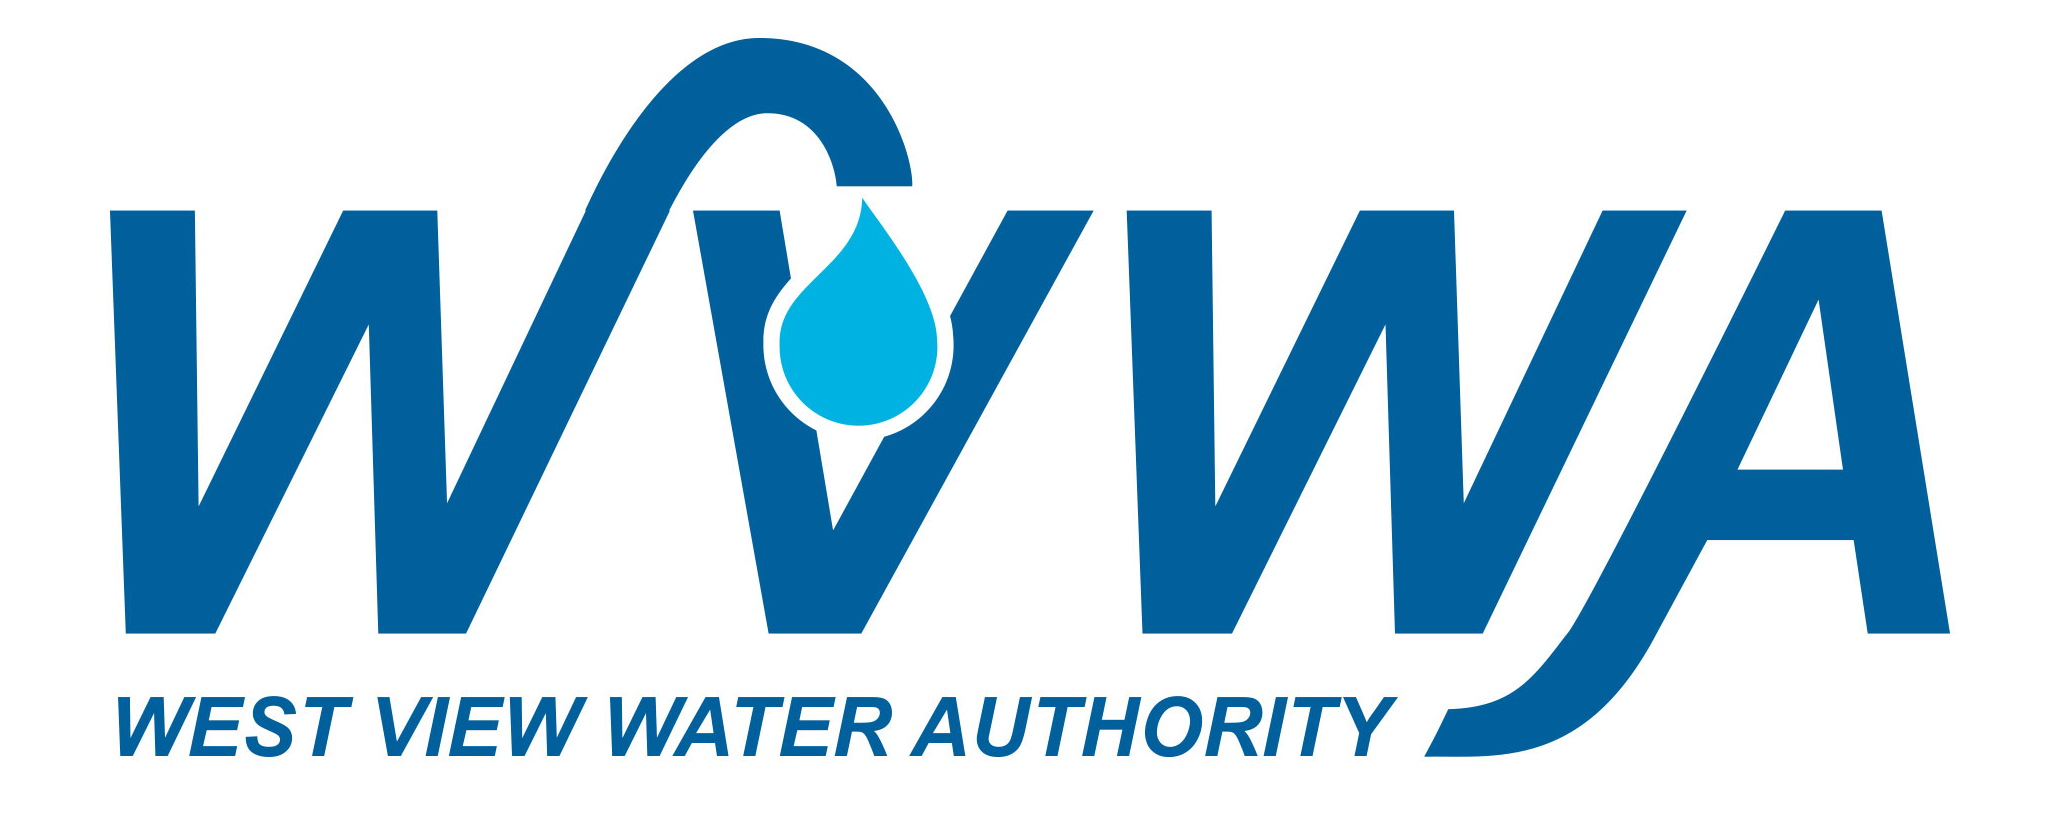 West View Water Authority